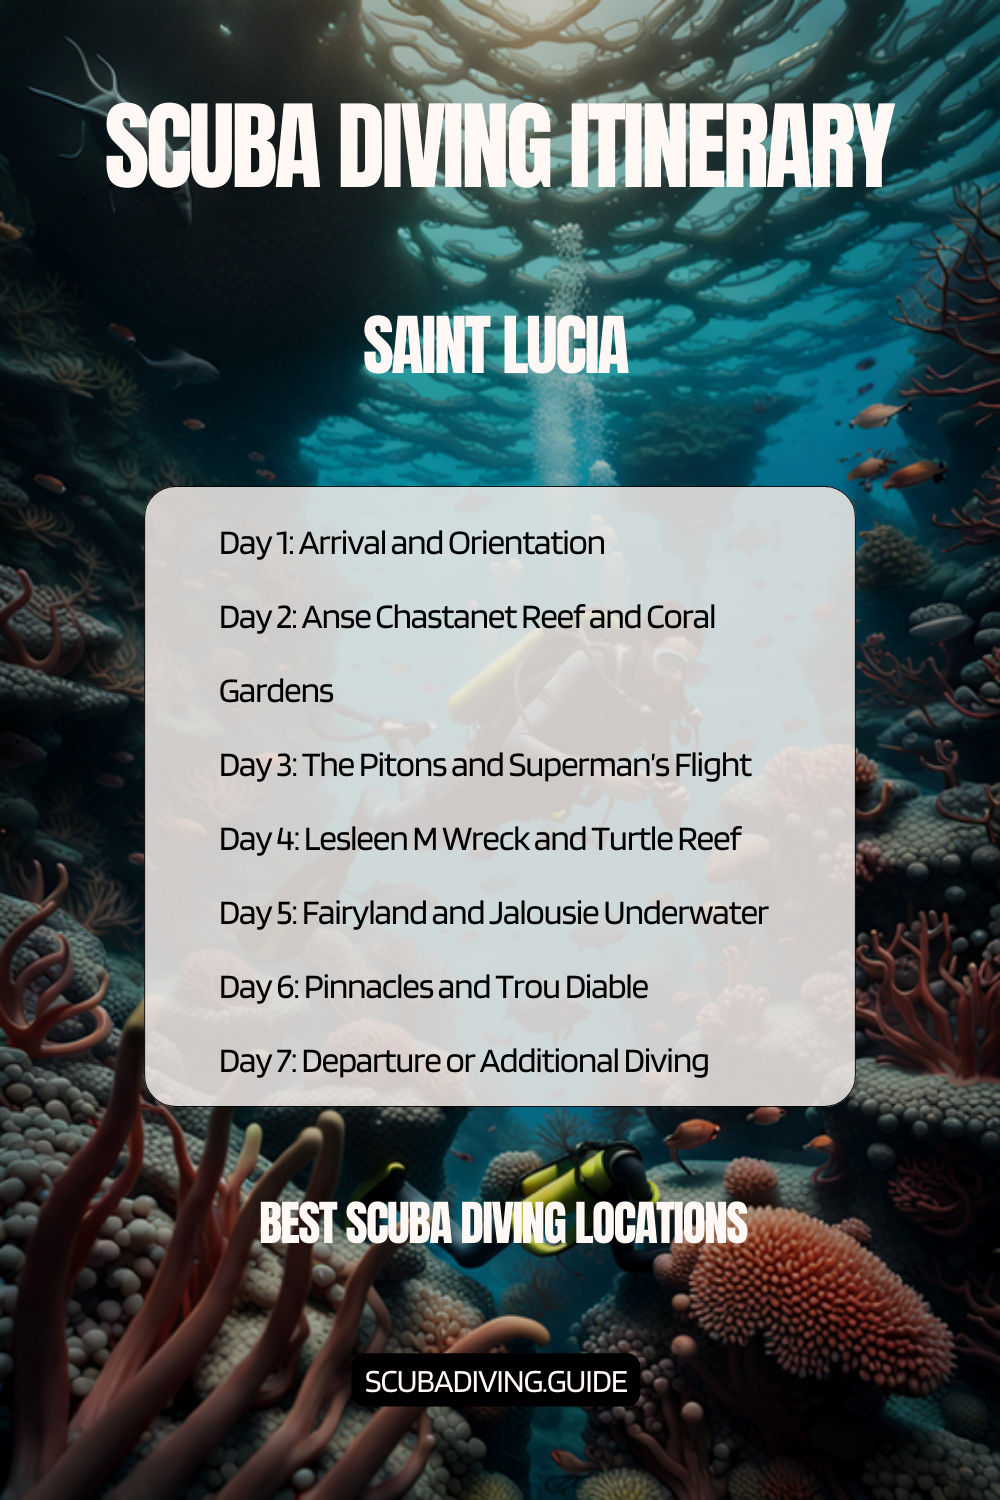 Saint Lucia Recommended Scuba Diving Itinerary